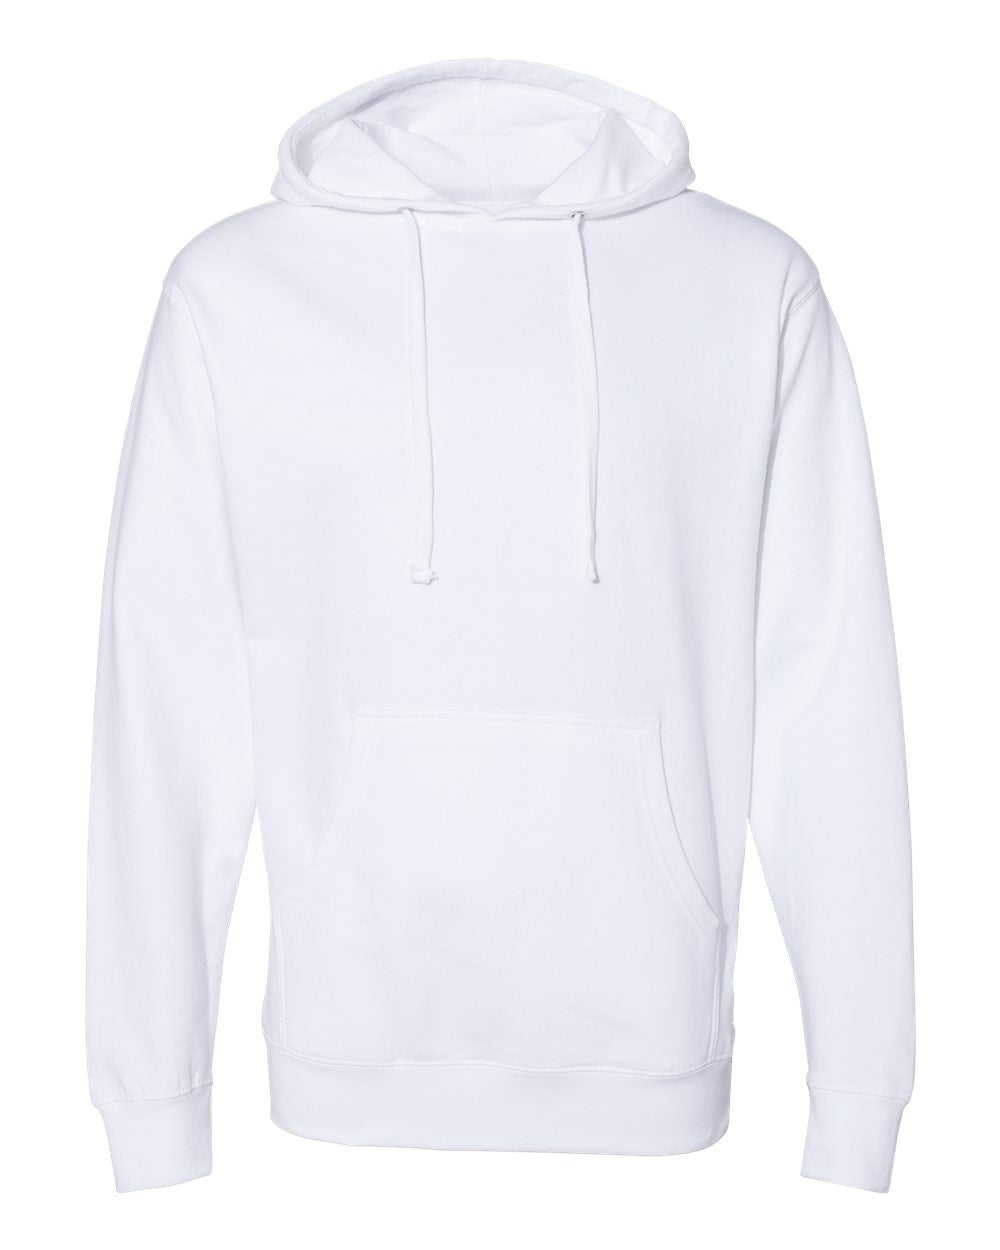 Independent Trading Co. Midweight Hooded Sweatshirt SS4500 #color_White